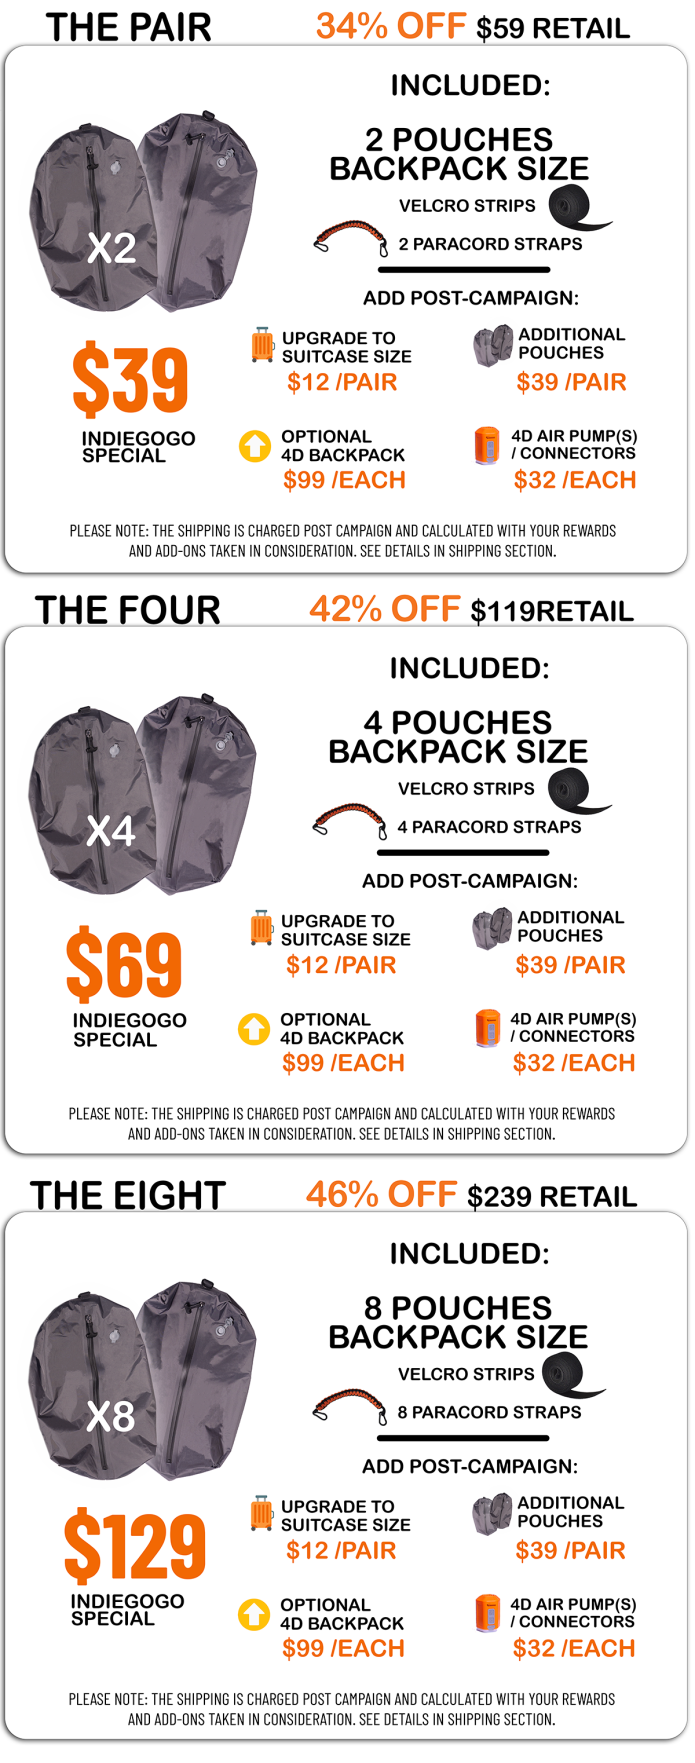 4D Pack: triple your backpack & suitcase capacity!